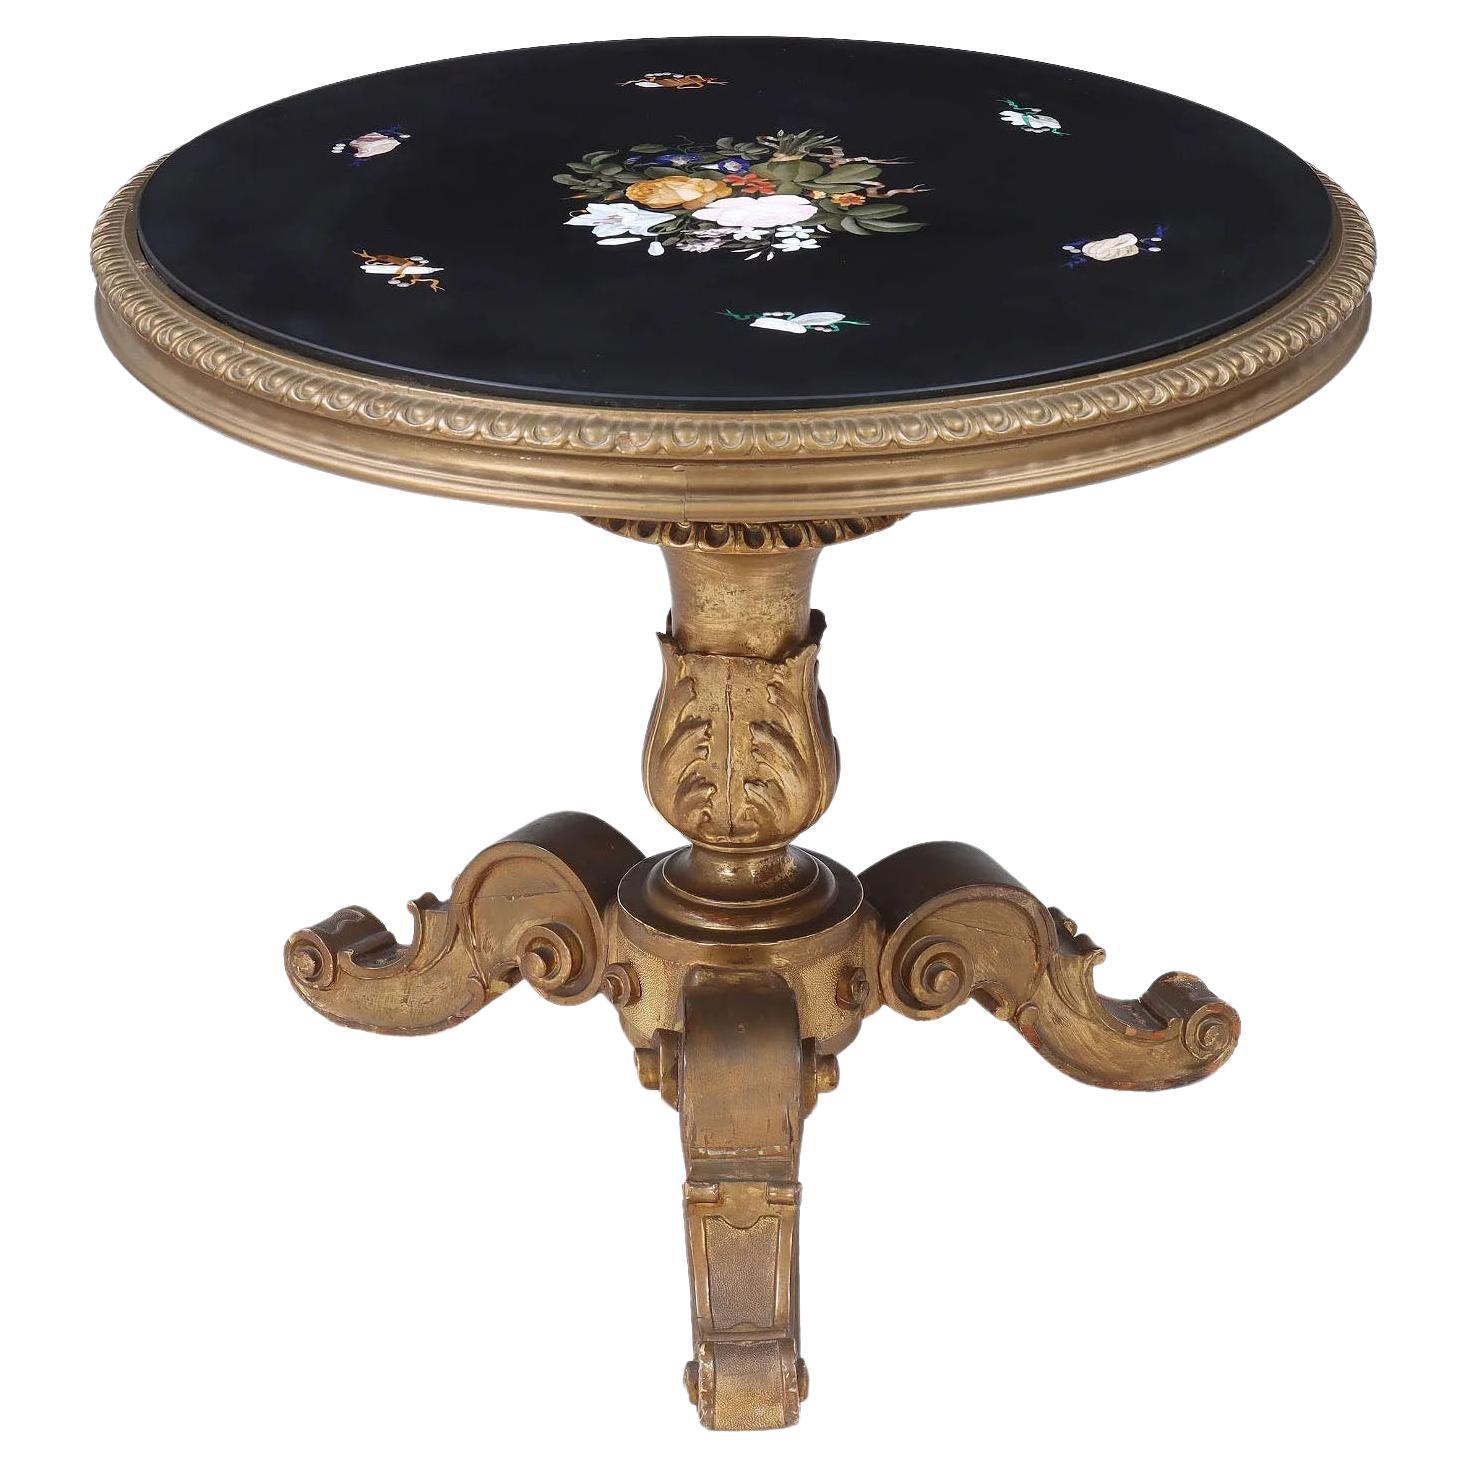 An Italian 19th Century Florentine Pietra Dura Inlaid Table on a Giltwood Stand For Sale